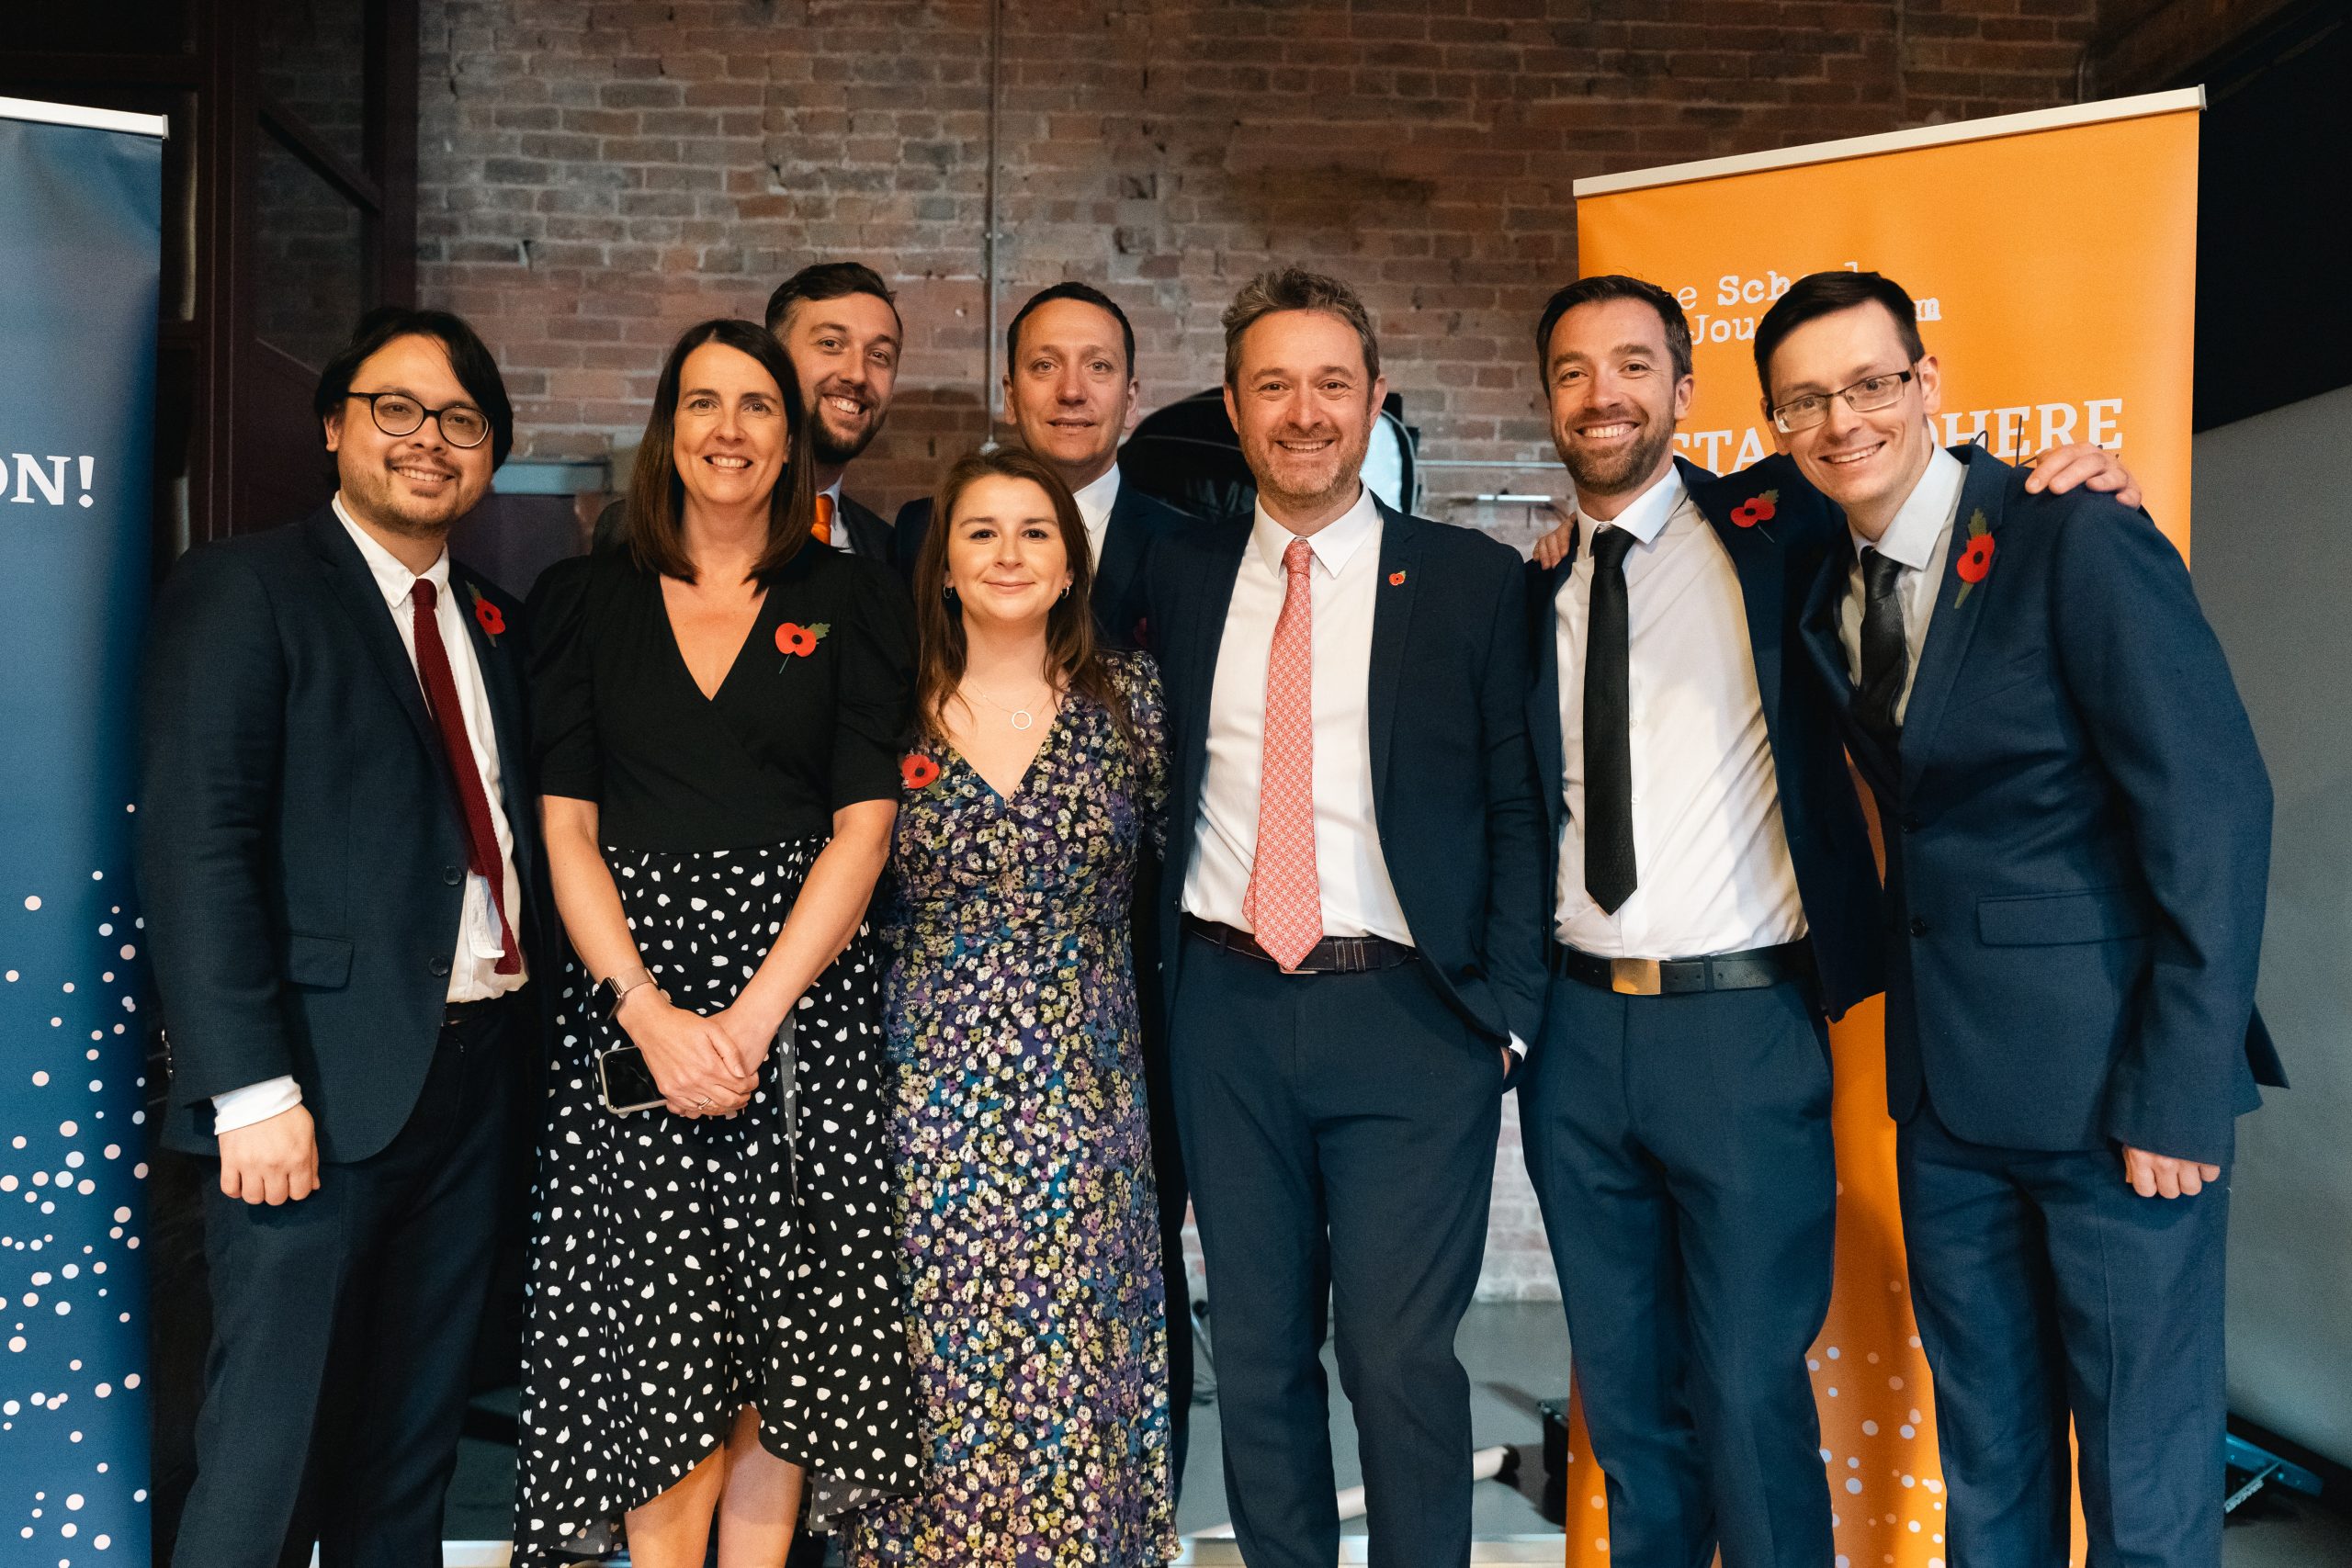 A group photo of the News Associates training team, including Paul, Alice, Kieran, Phil, Lucy, James, Graham and Tom. The photo was taken at graduation 2023 so everyone is dressed up and looking happy. 